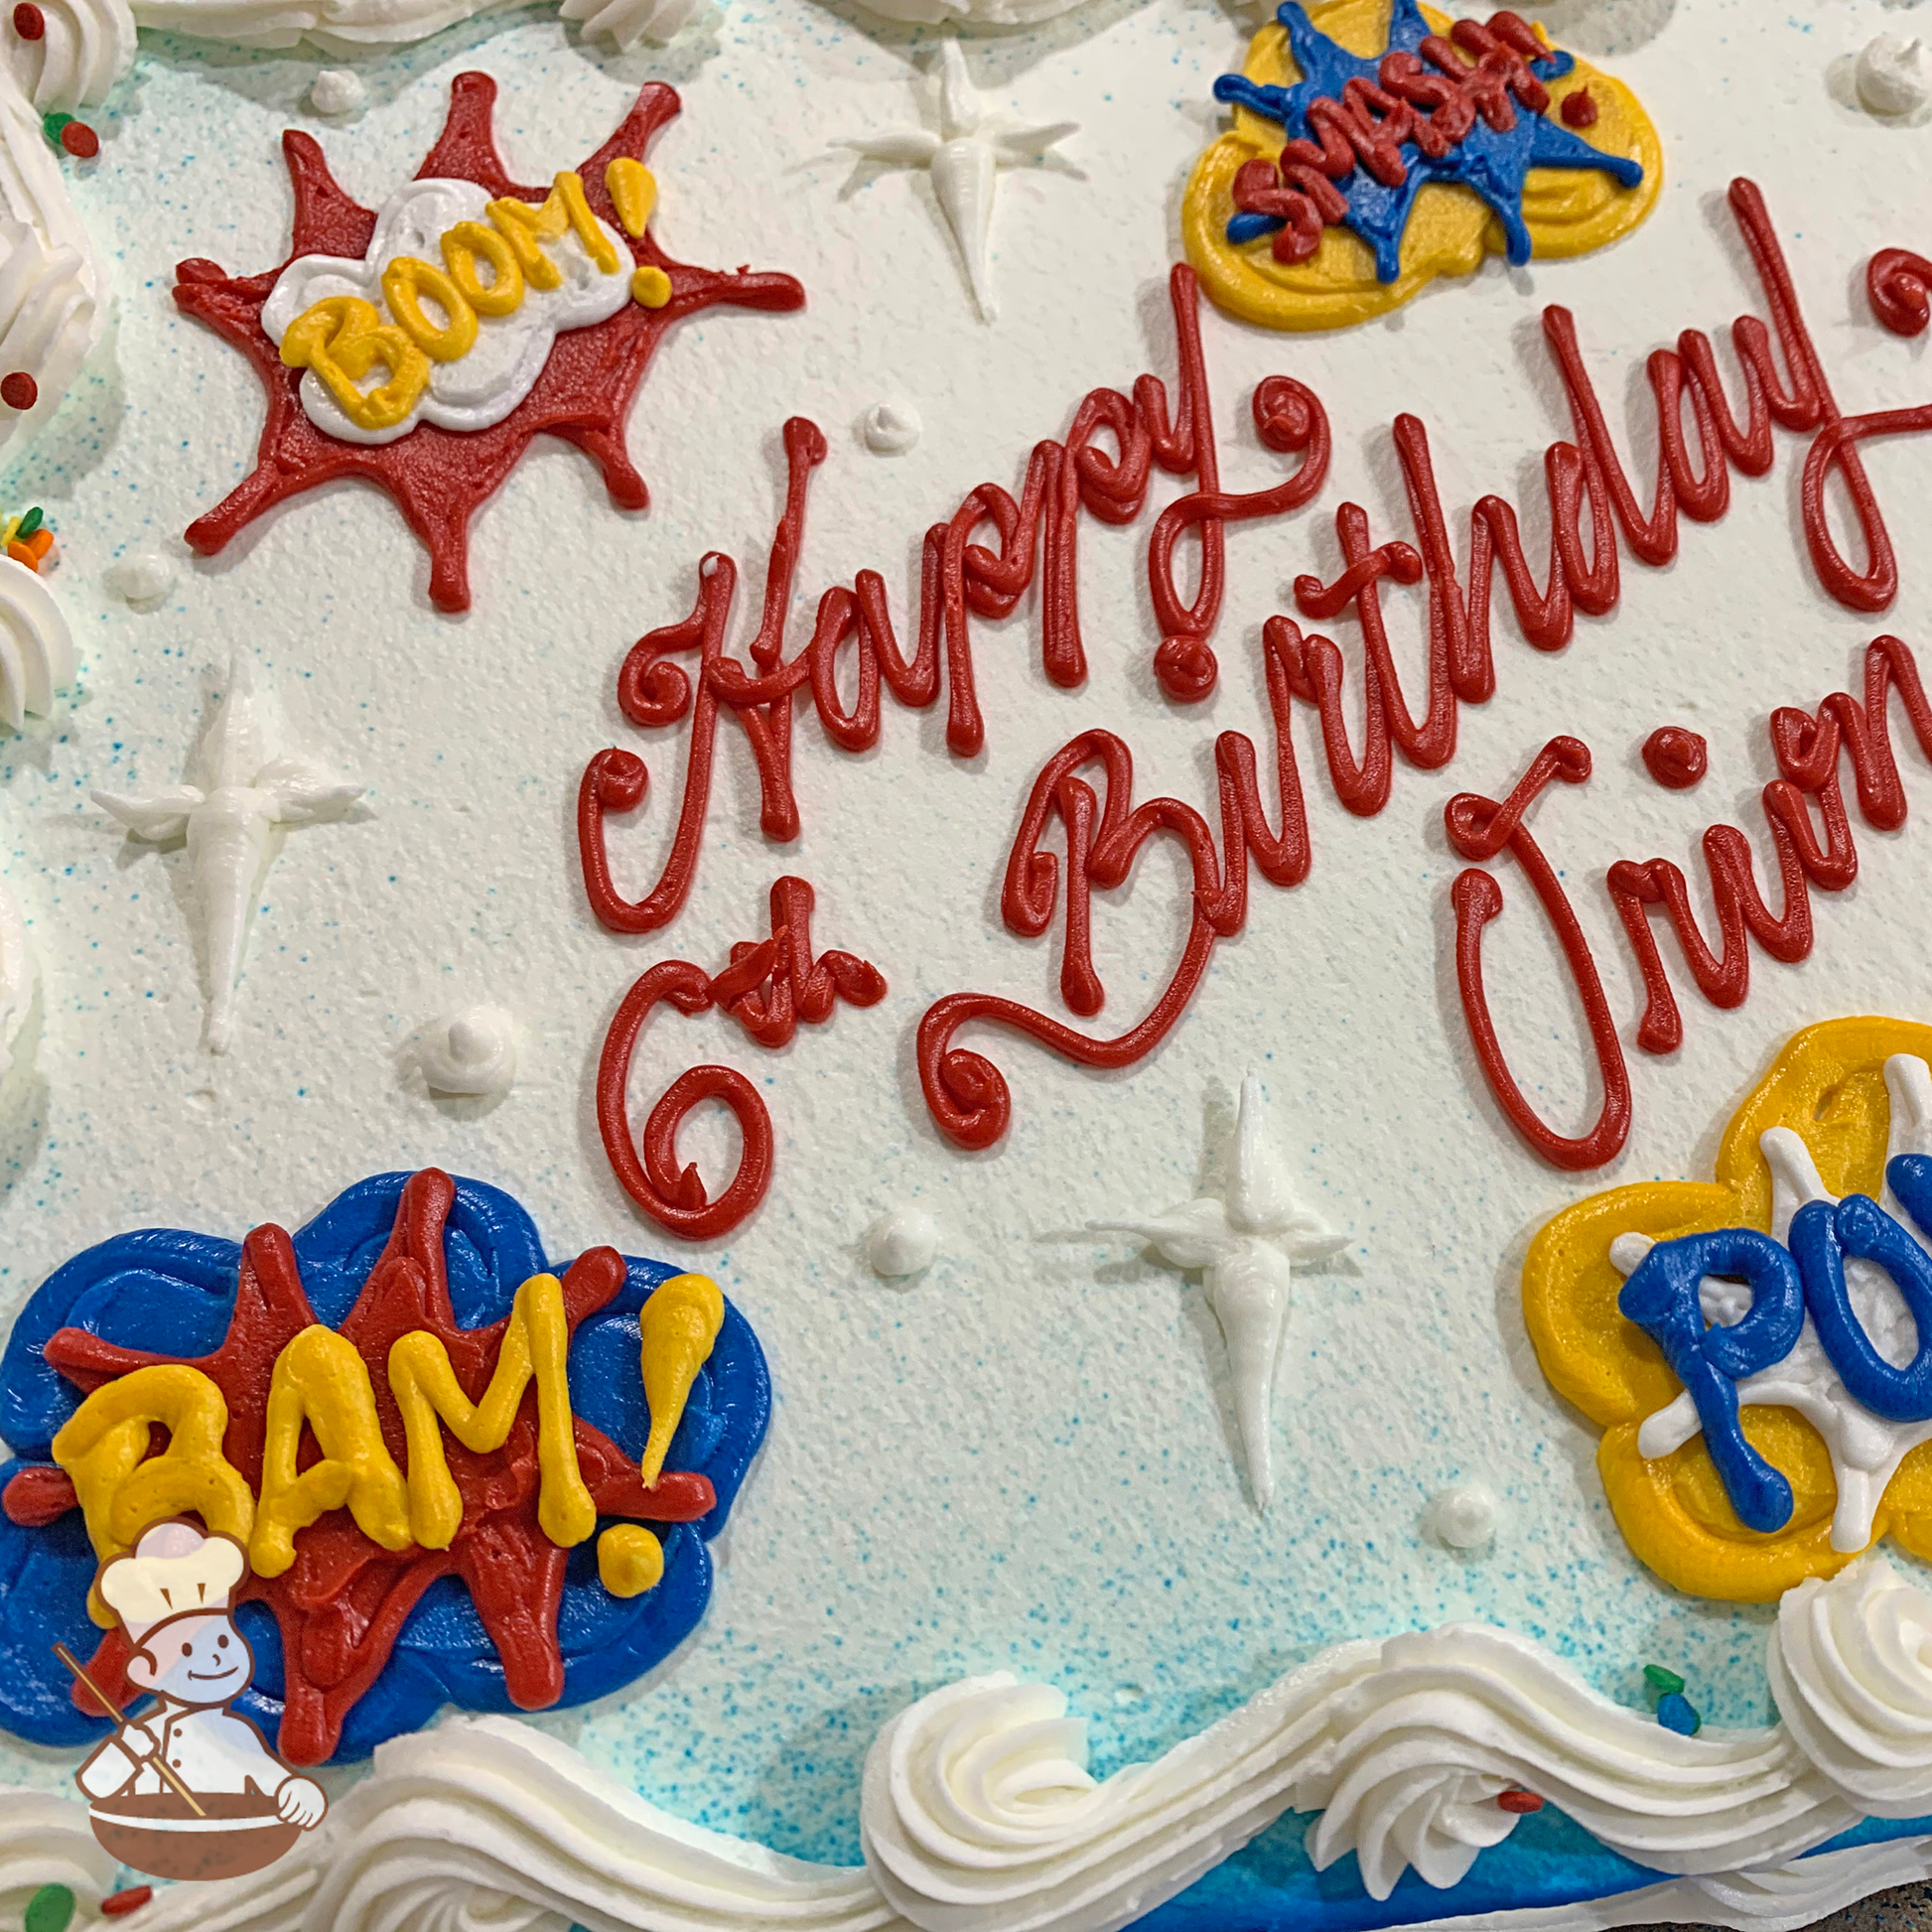 Birthday sheet cake with action message and speech bubbles saying: Boom!, Bam!, Smash!, and Pow!